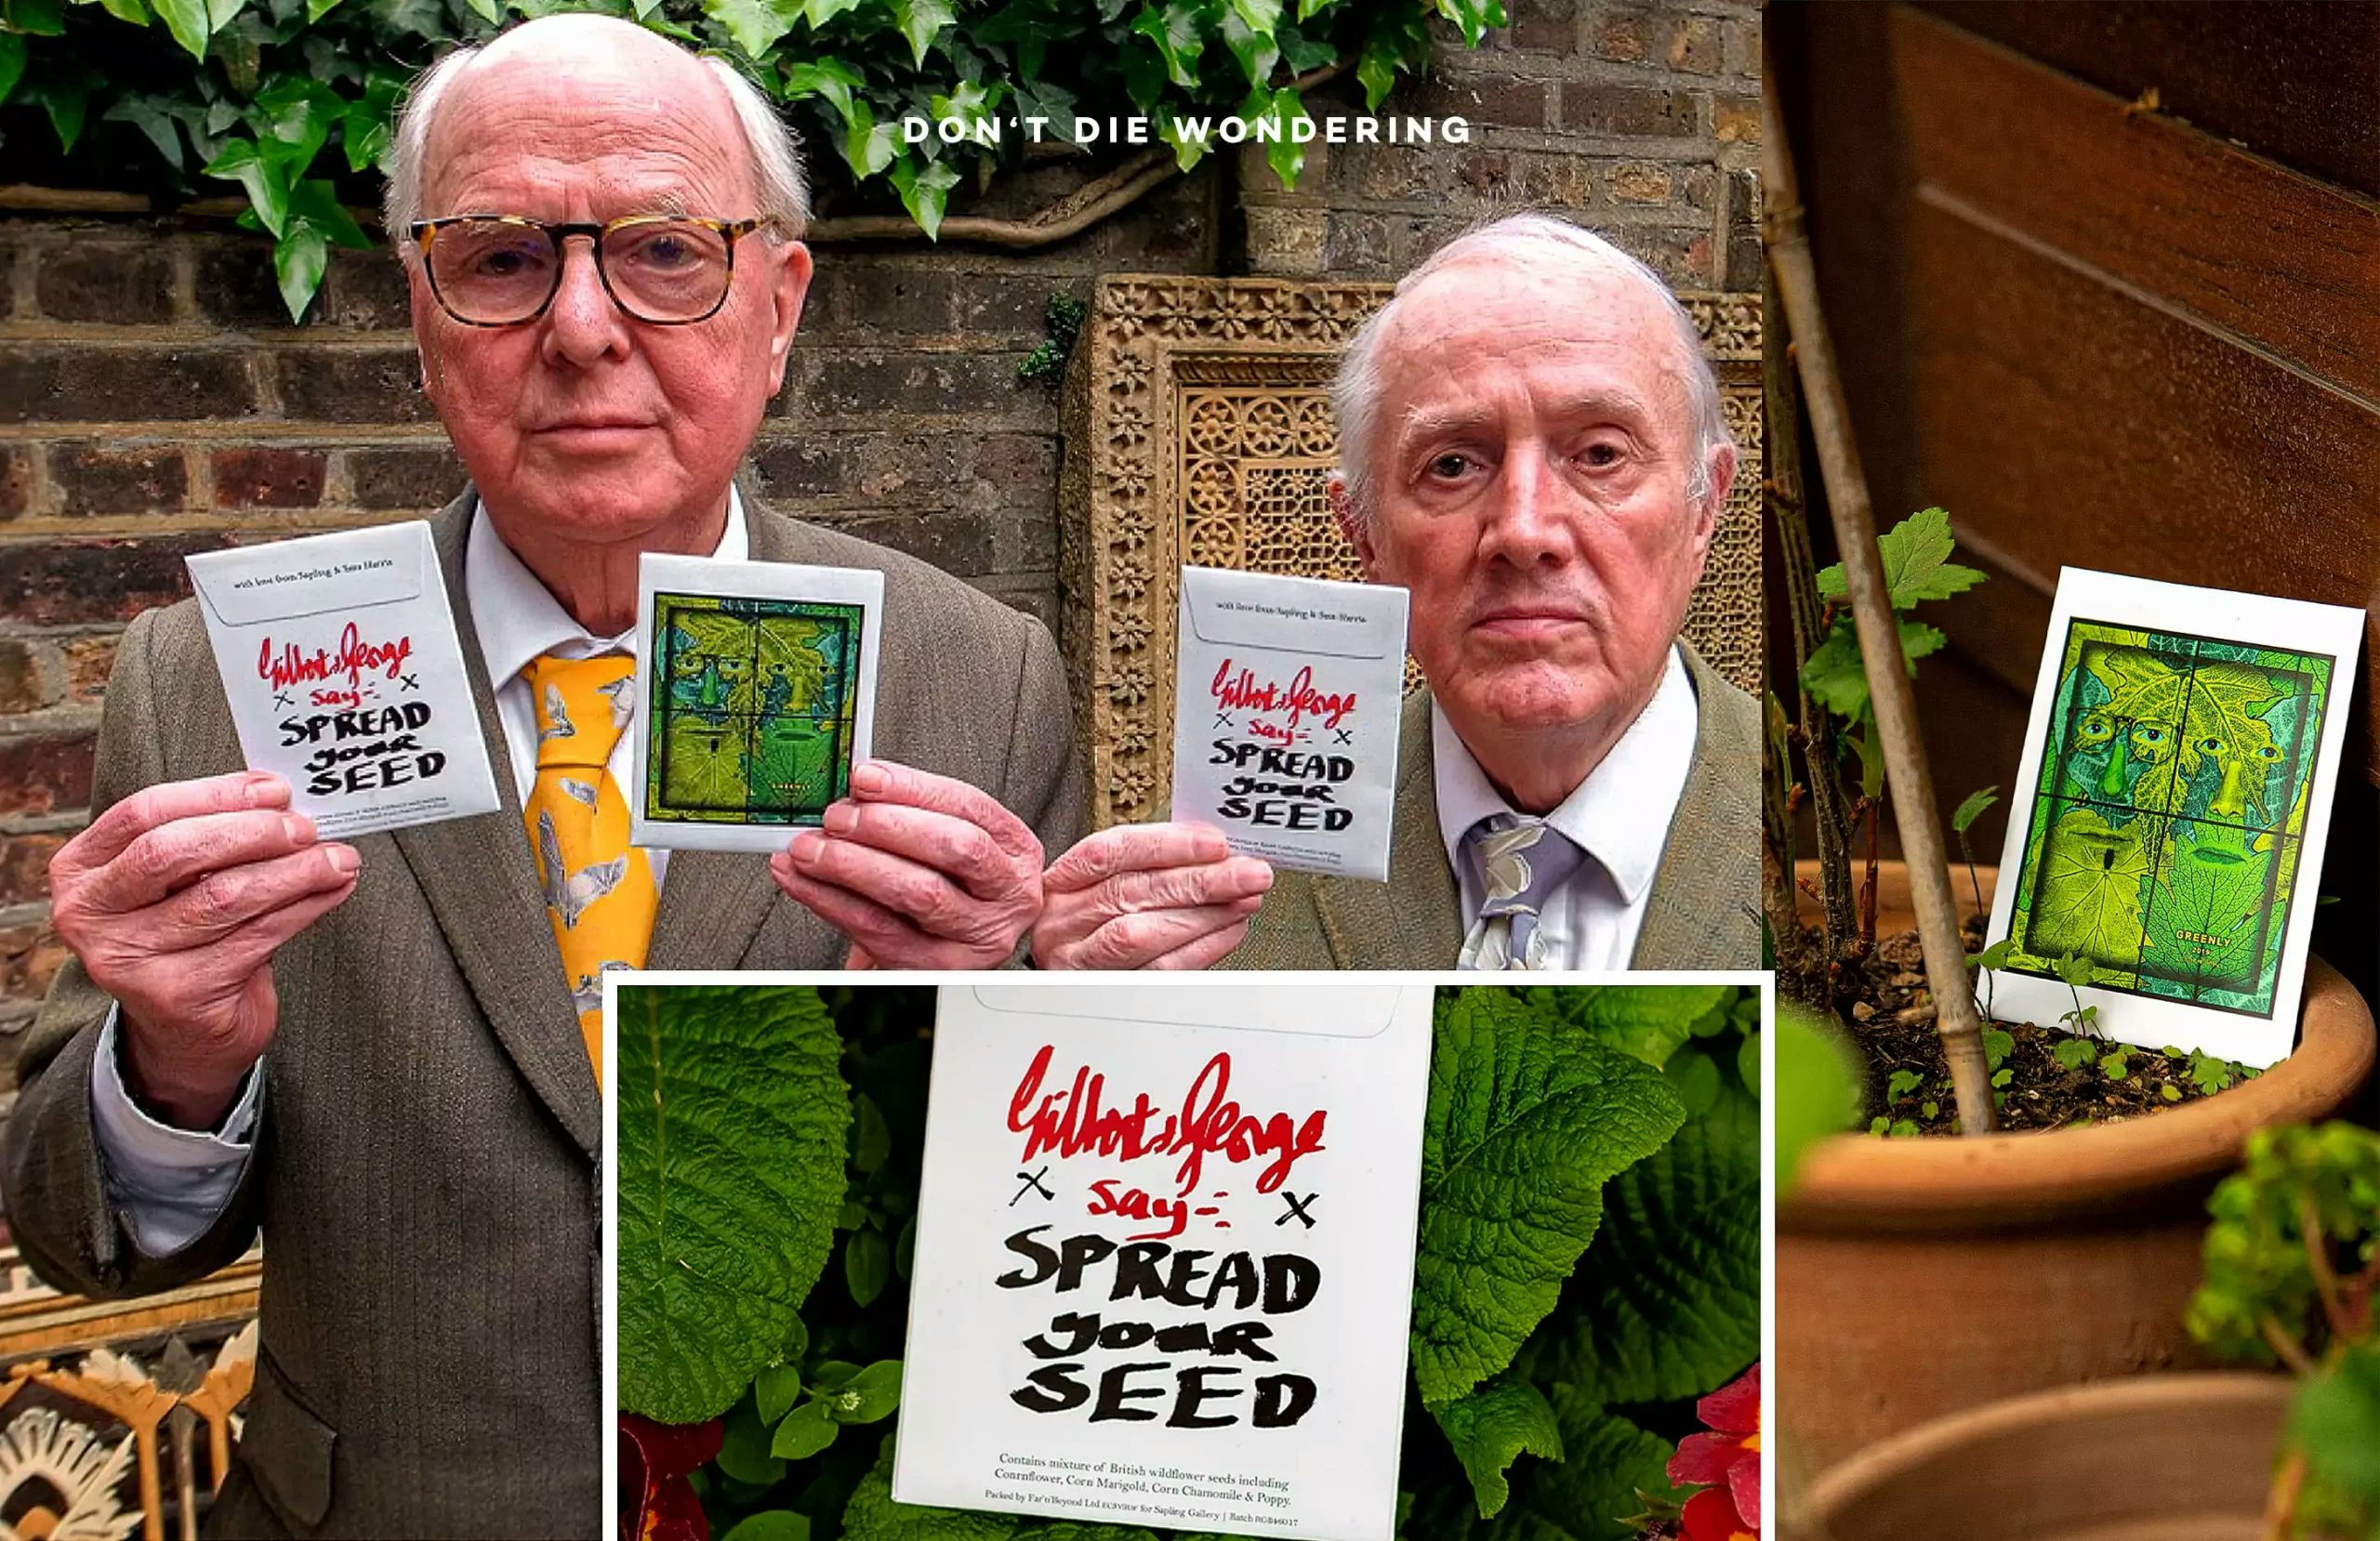 Spread Your Seed This Earth Day With Artists Gilbert & George  